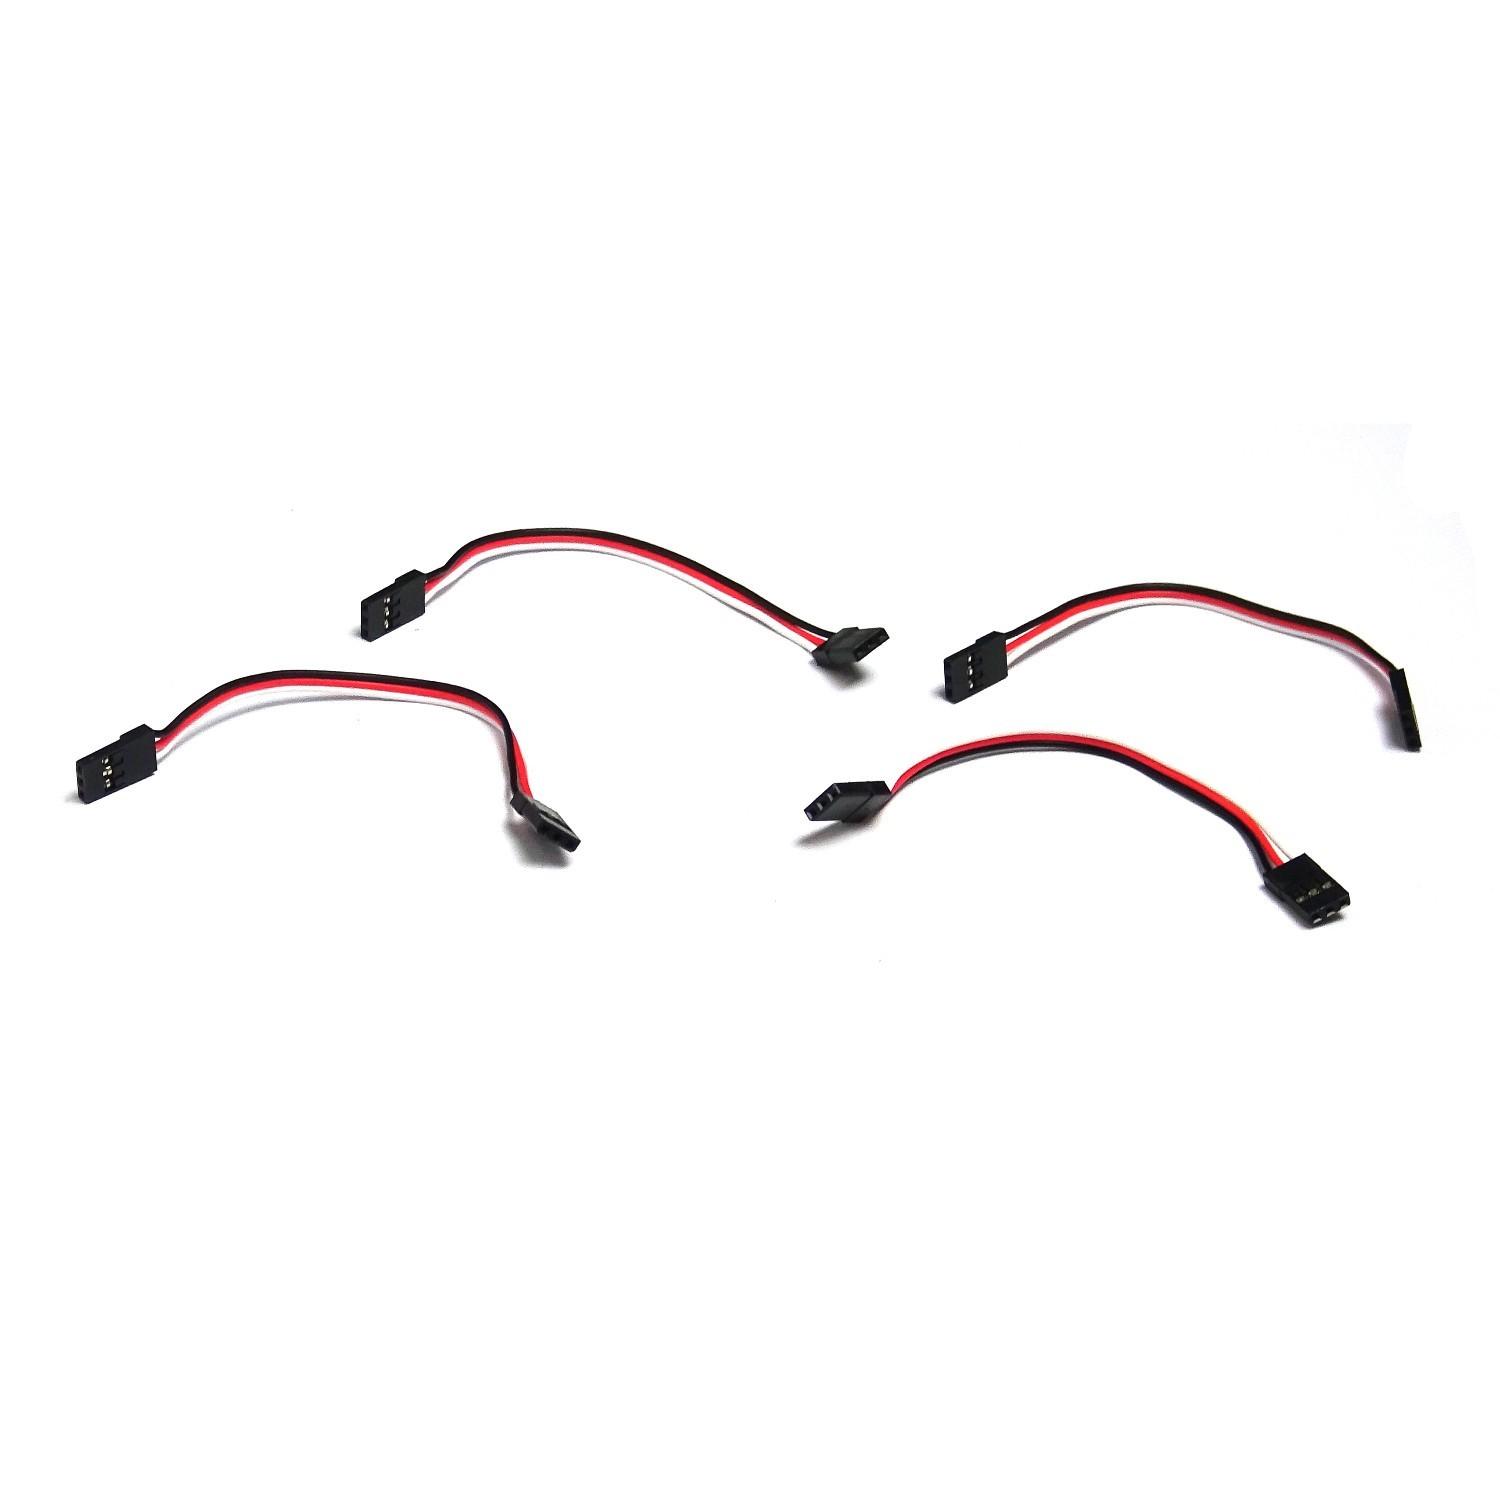 4x 100mm Servo Extension Lead Wire Cable MALE TO MALE KK MK MWC Flight Control - UK Seller